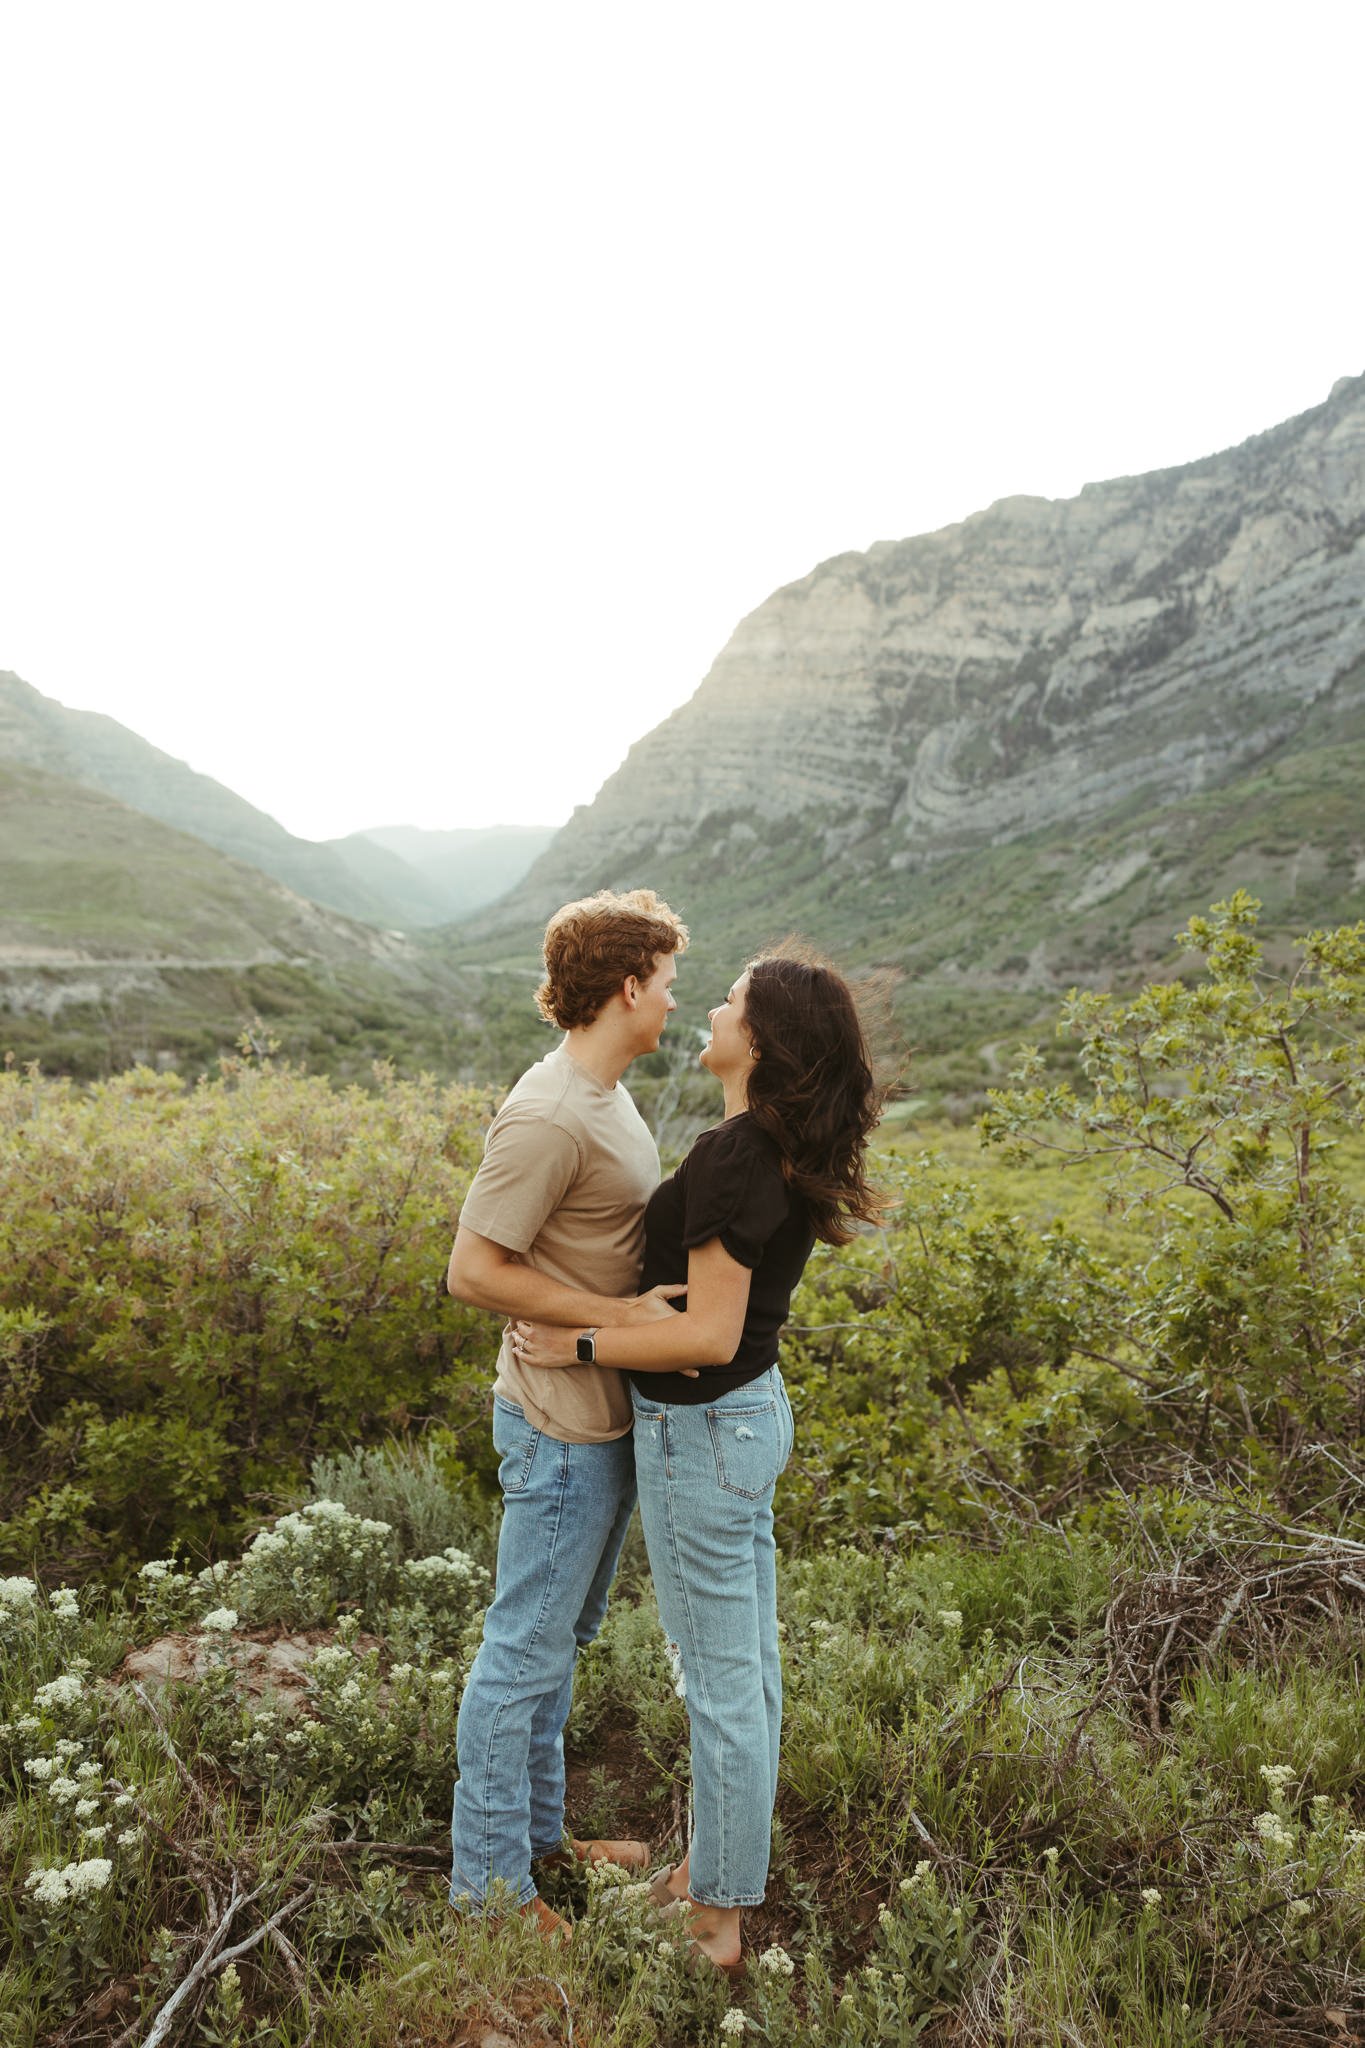 Spring-Provo-Canyon-Wildflowers-Engagement-Session-3